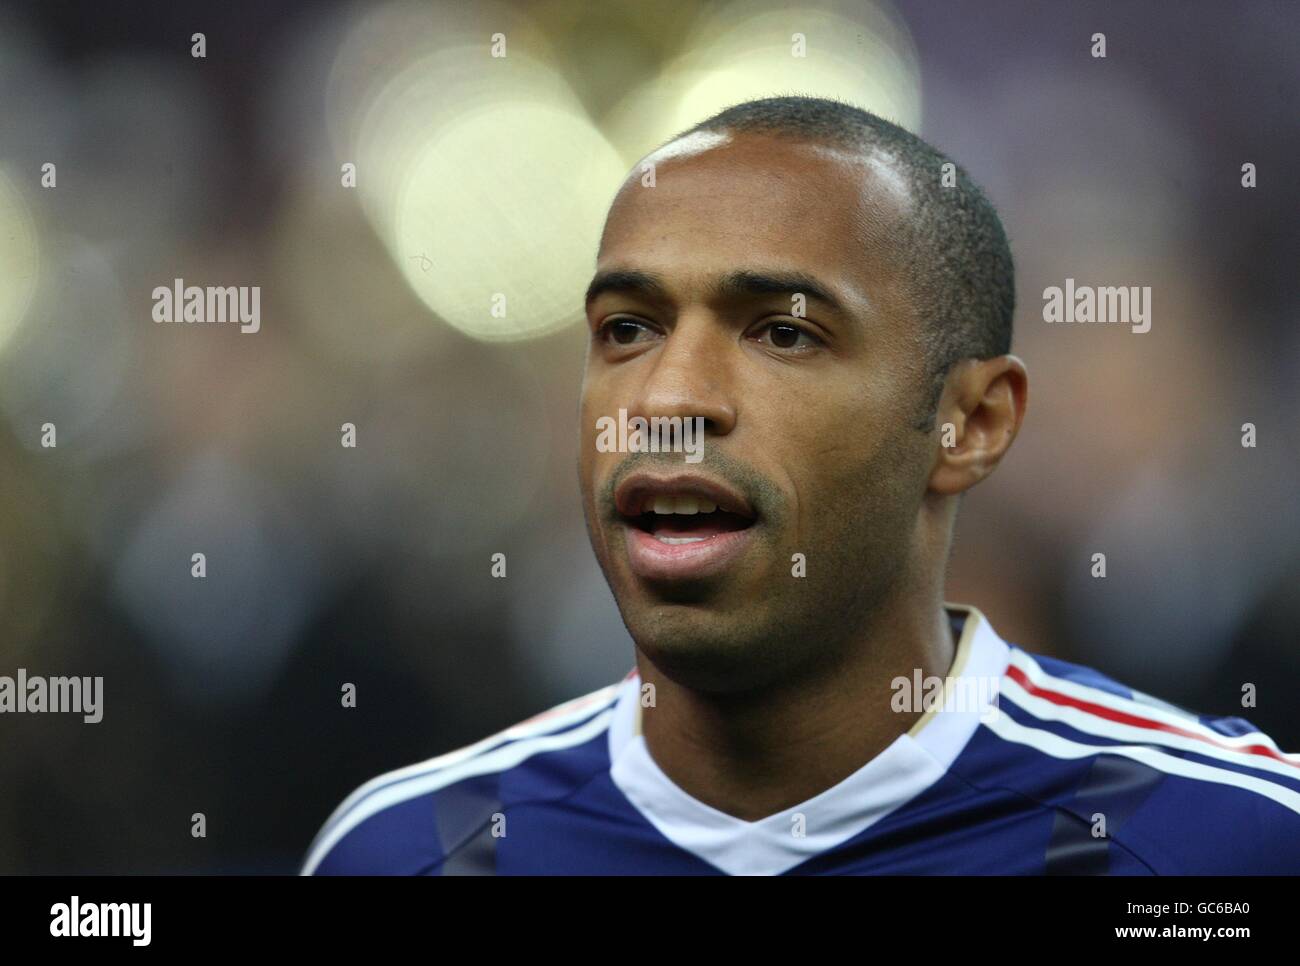 Soccer - FIFA World Cup 2010 - Play Offs - Second Leg - France v Republic of Ireland - Stade de France. France captain Thierry Henry Stock Photo